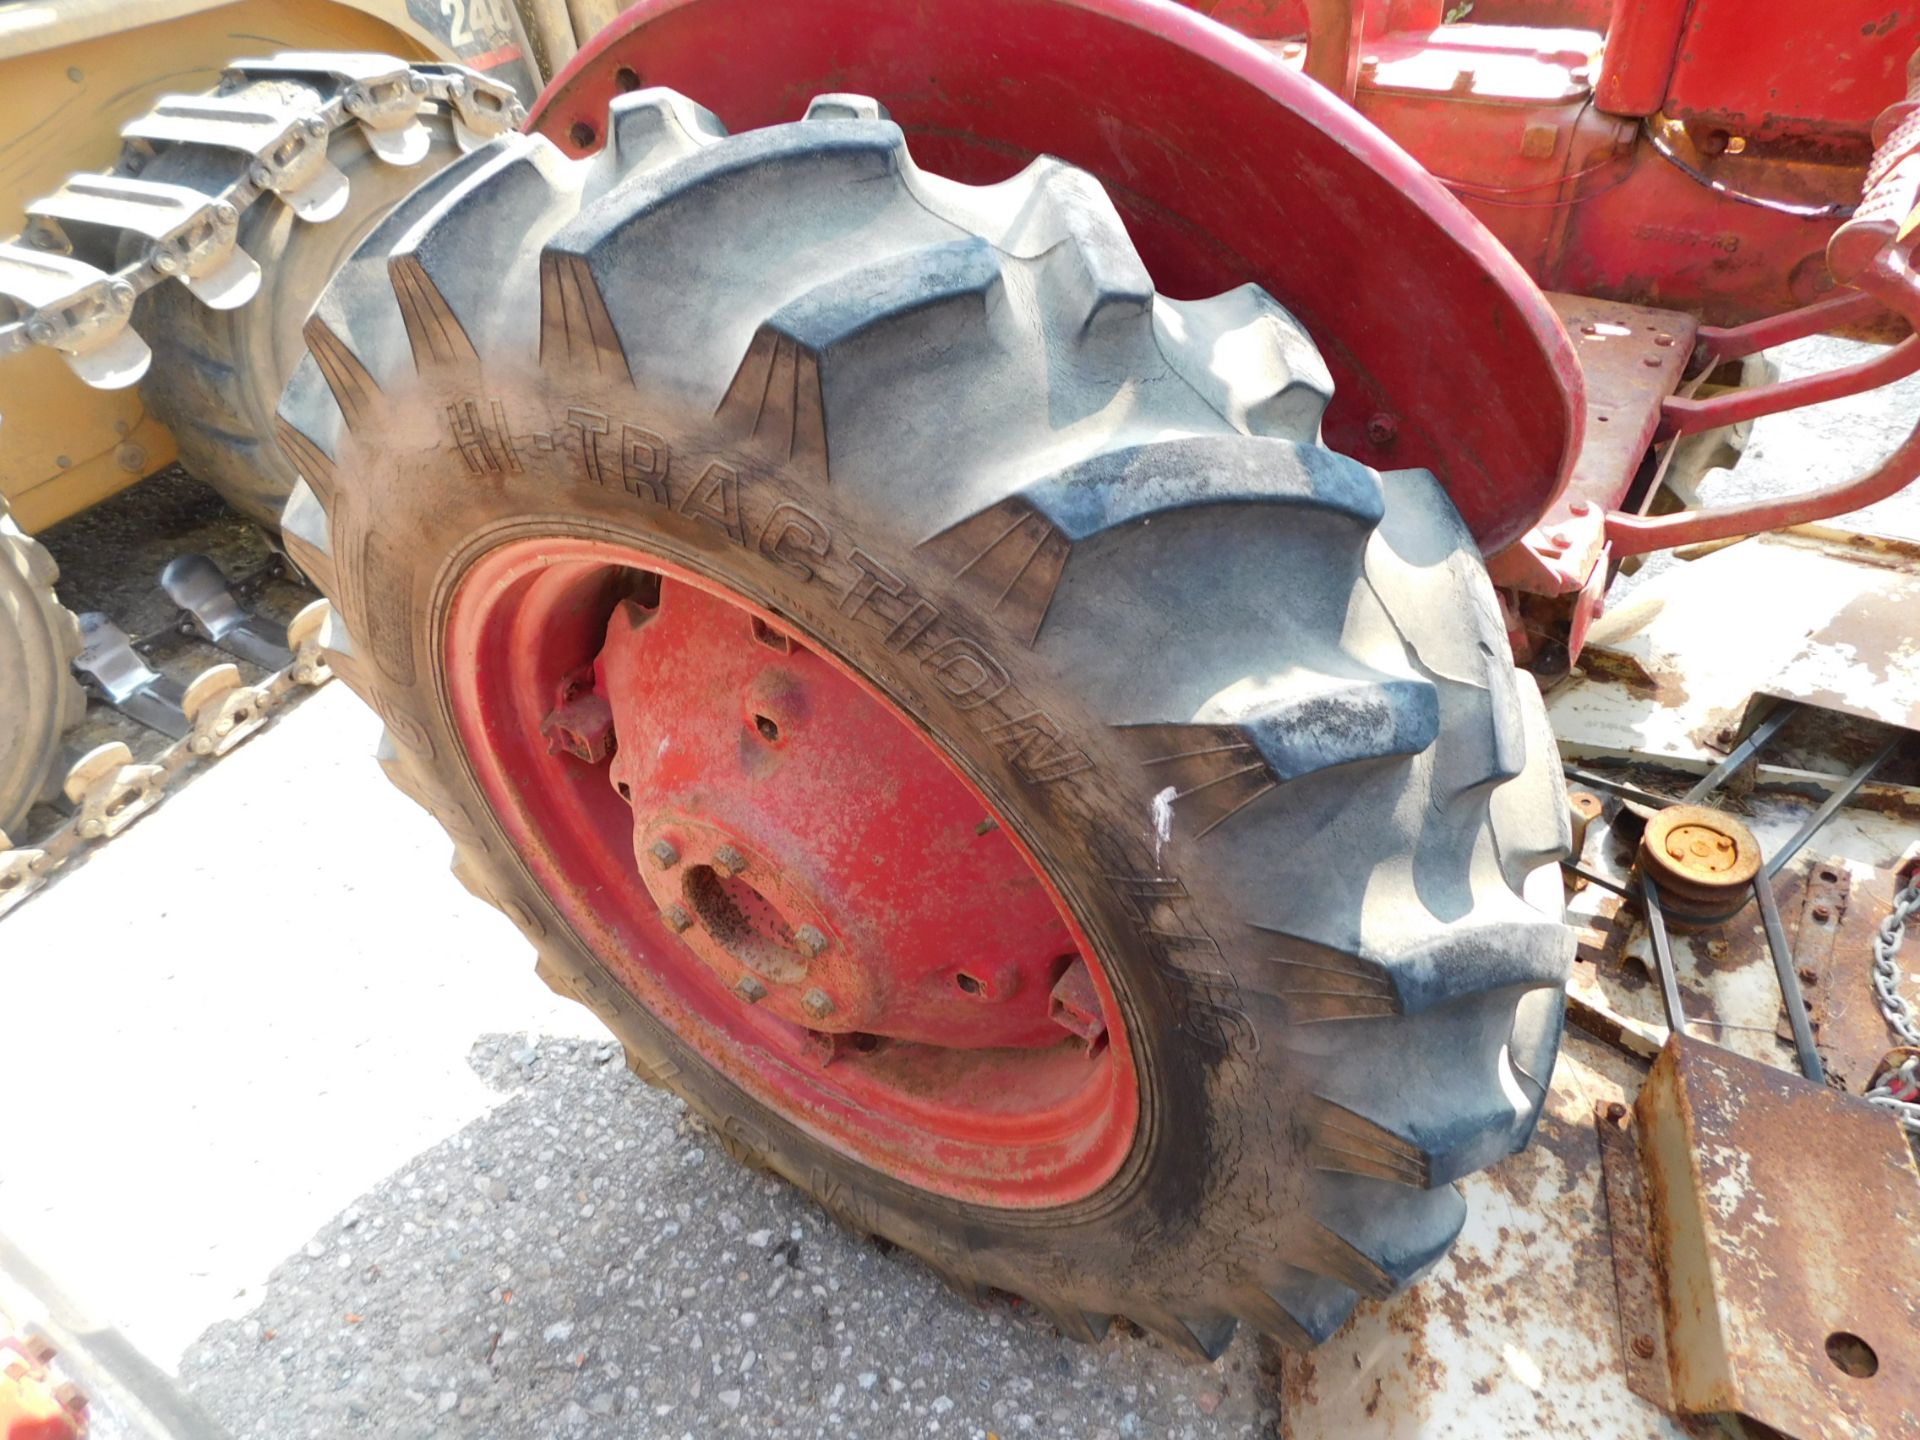 1957 Farmall Model 130 Tractor with Woods 72" Belly Mower - Image 10 of 22